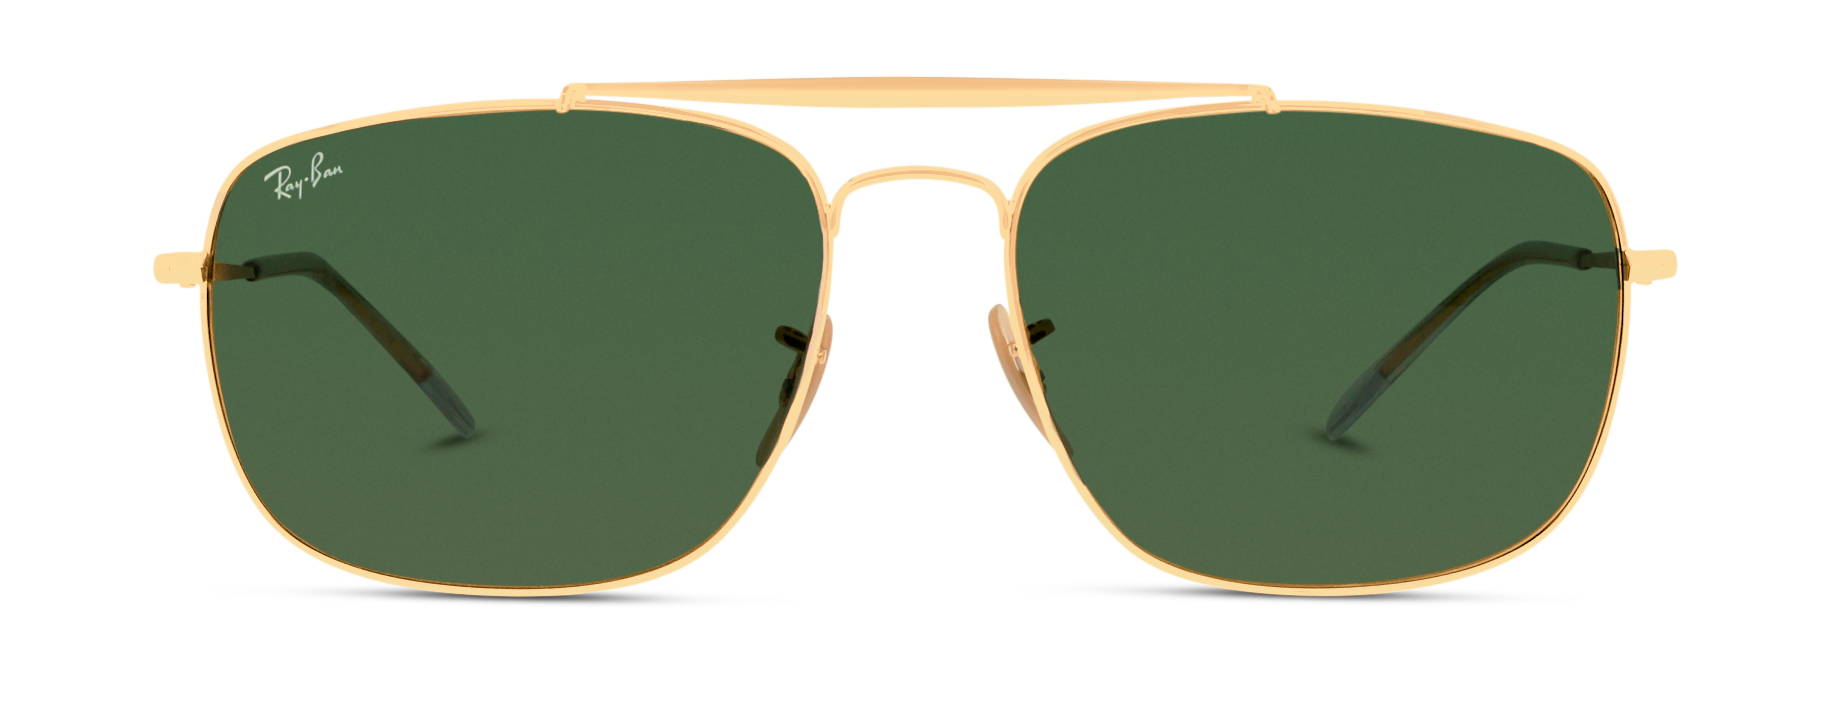 [products.image.front] Ray-Ban Colonel RB3560 001